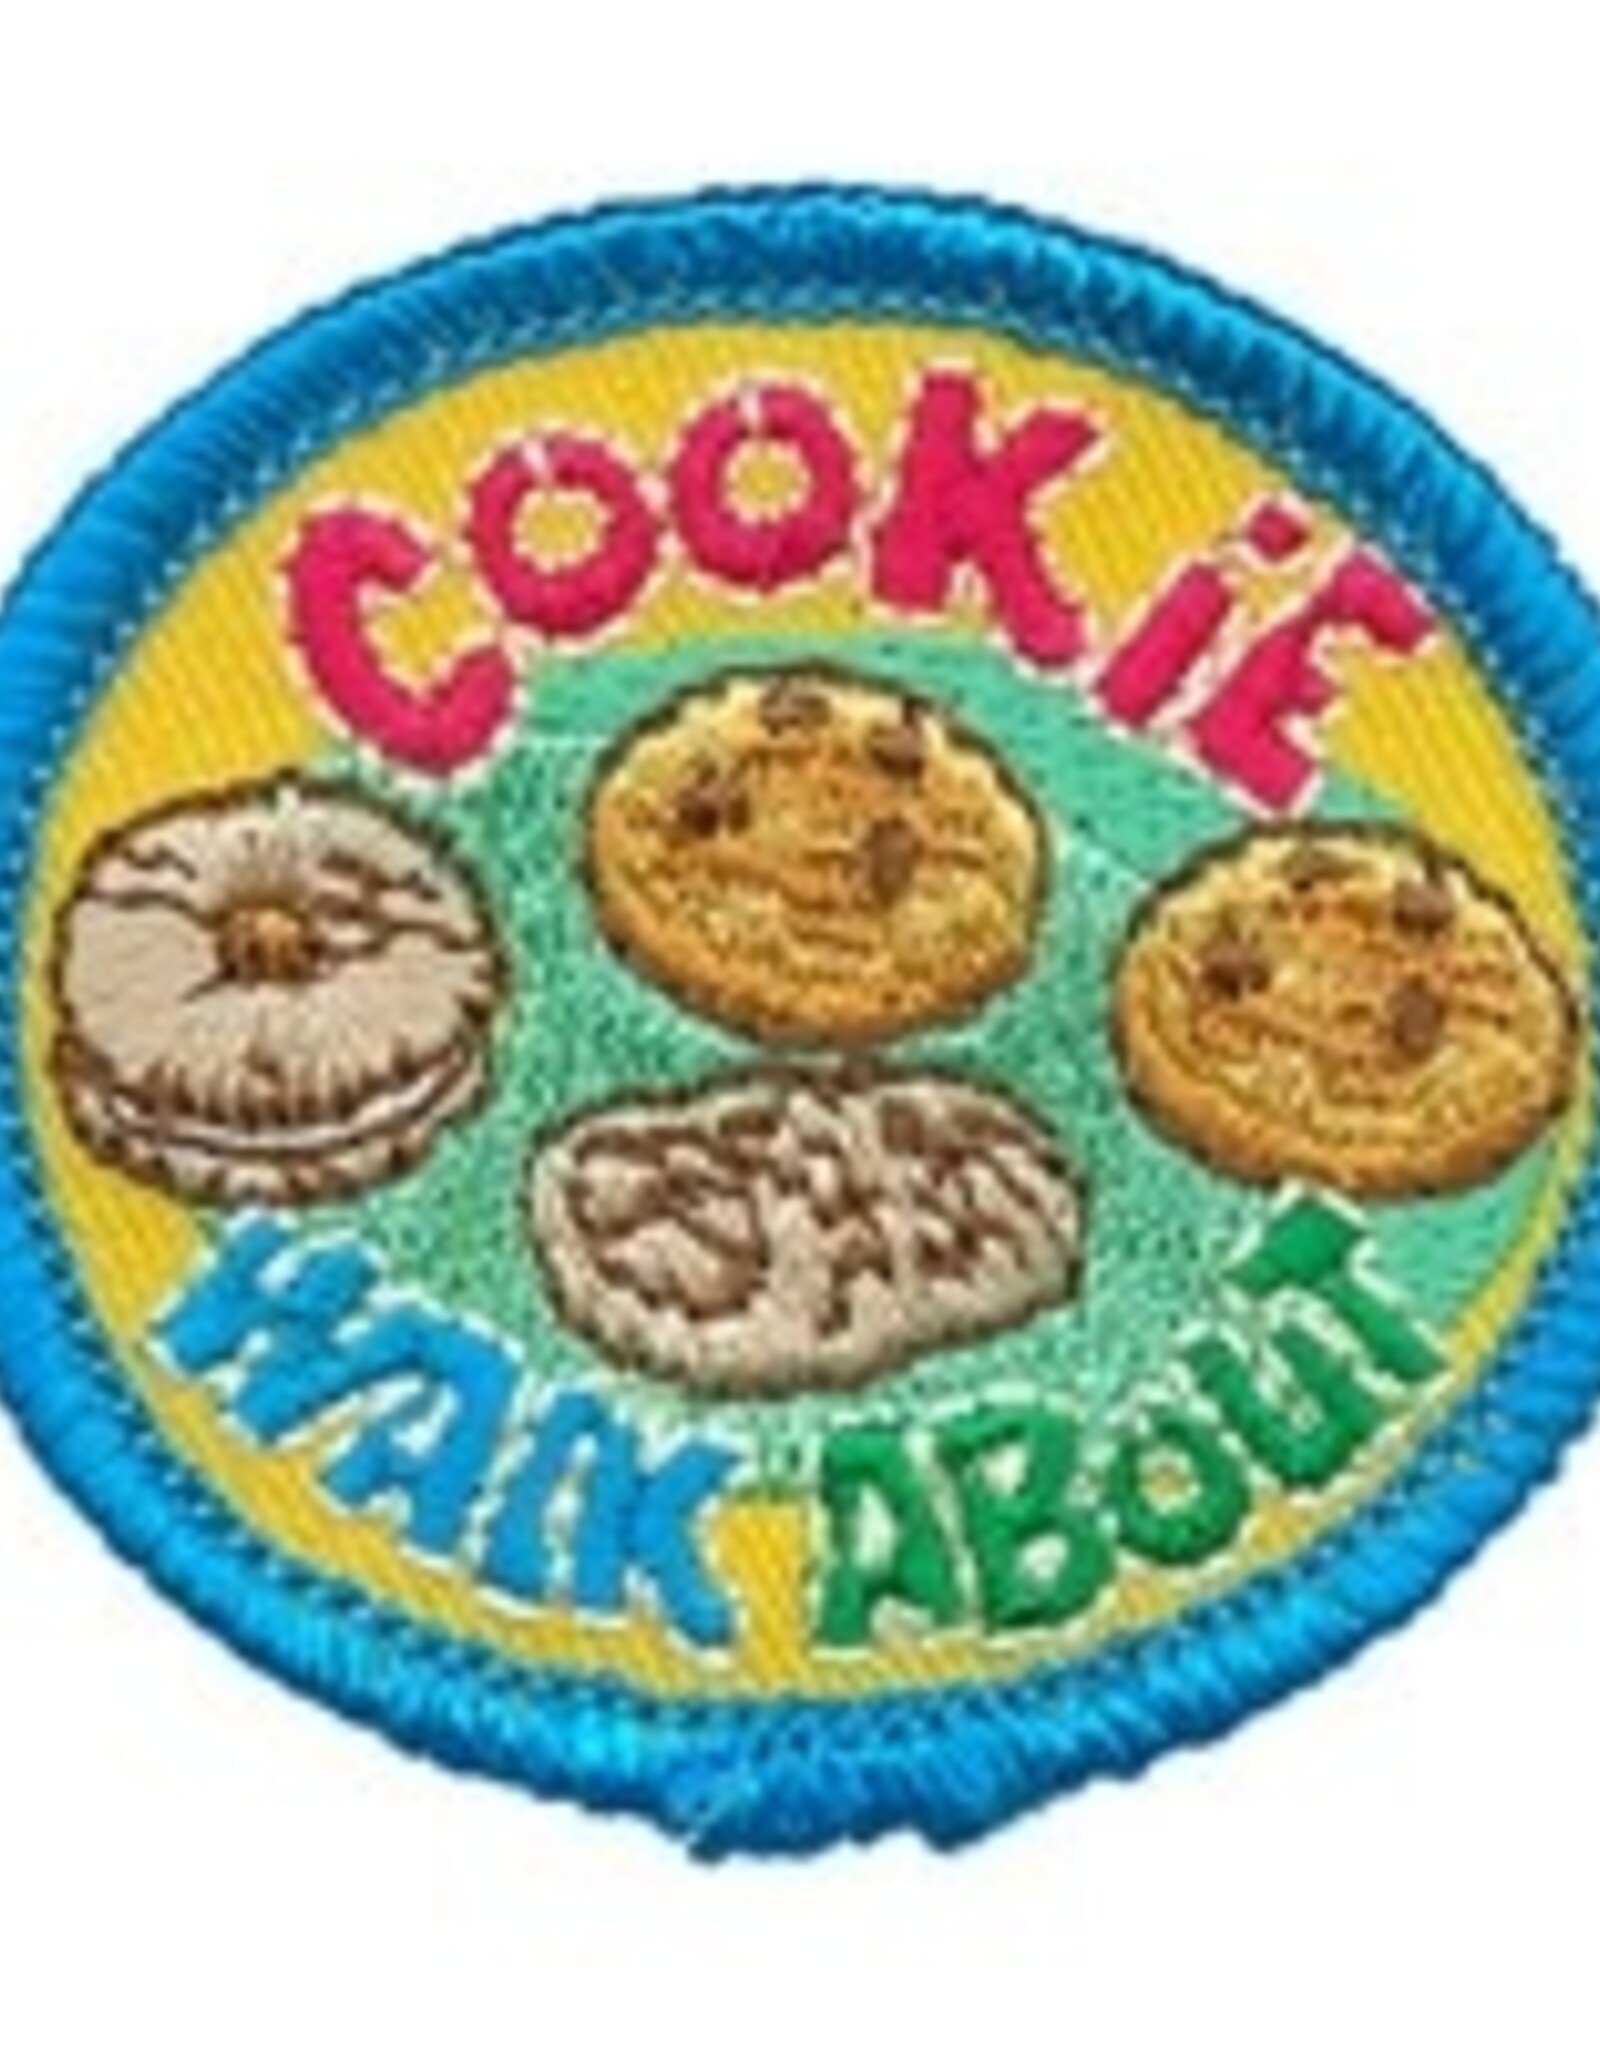 Cookie Walk About Circle Fun Patch